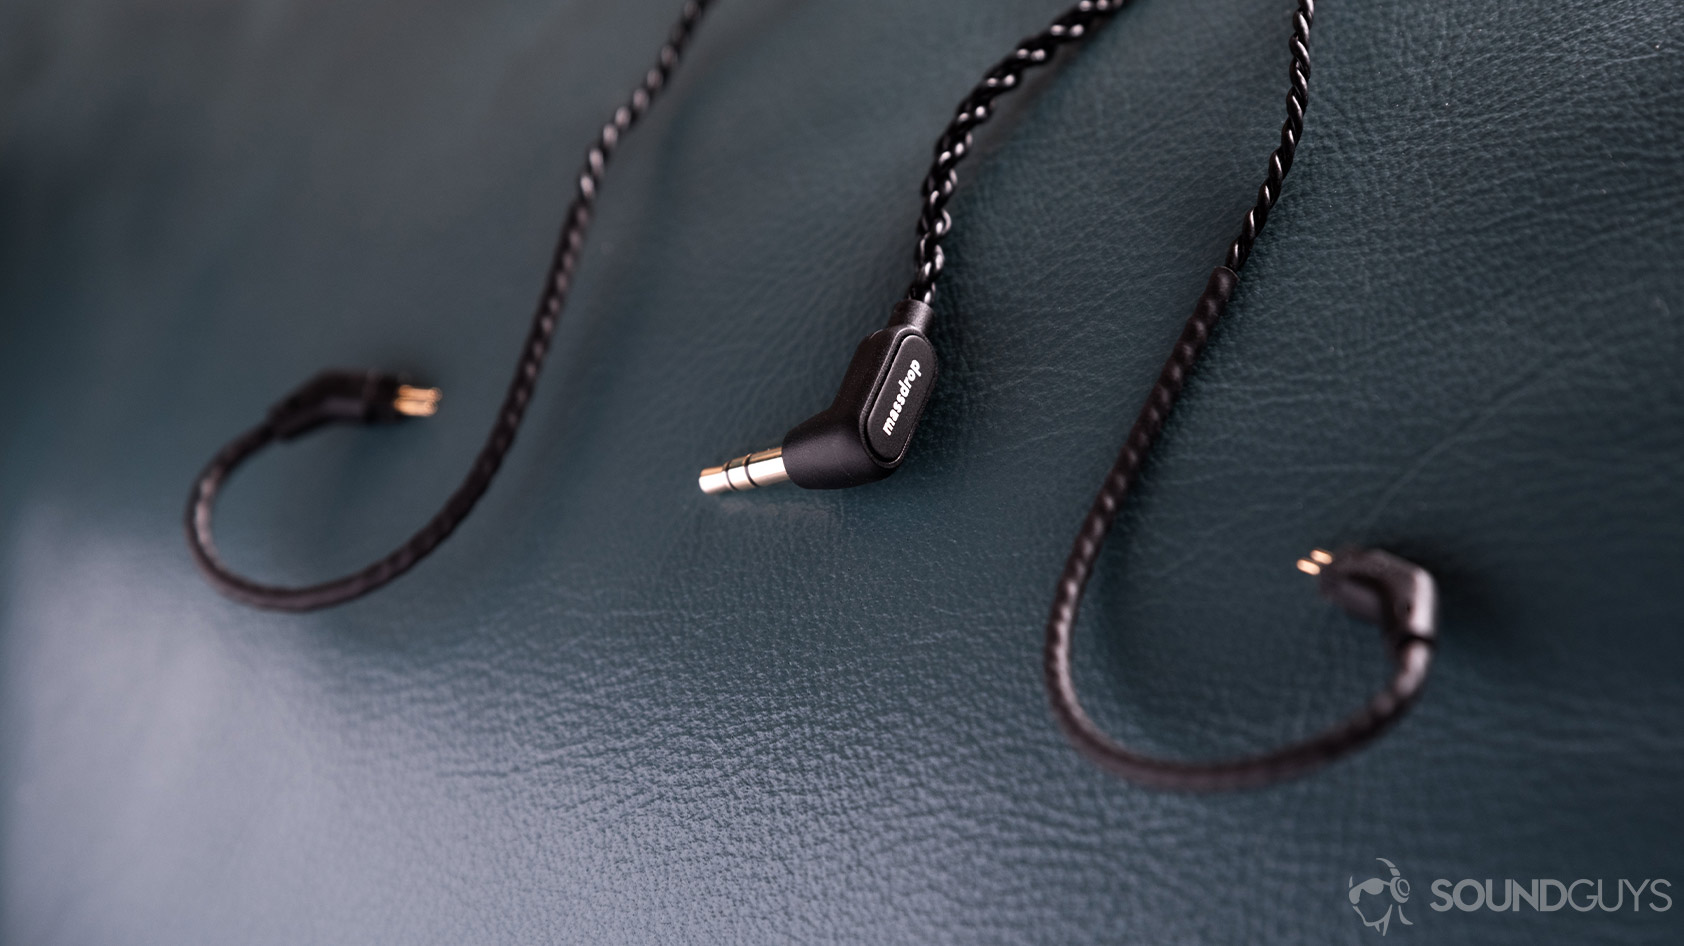 A photo of the Massdrop x Empire Ears Zeus earbuds removable 3.5mm cable with 2-pin connectors terminating at each ear hook.